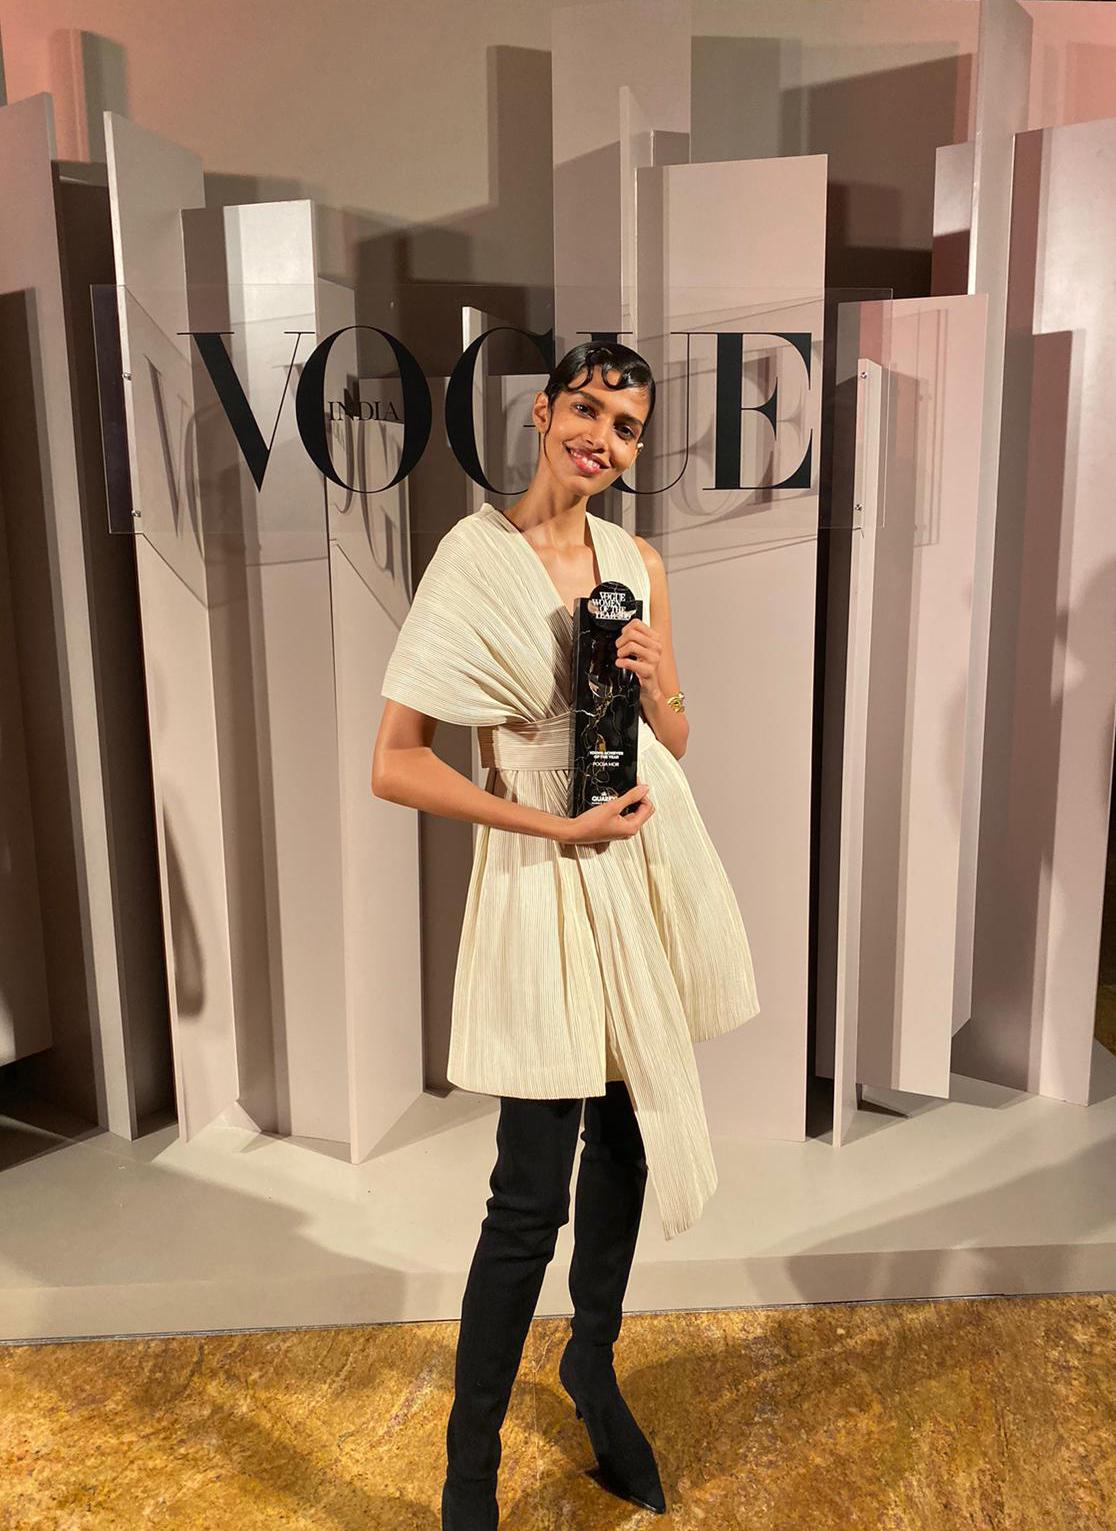 Supermodel Pooja Mor at the Vogue Women Of The Year 2019 on Oct. 19, 2019. (Courtesy of Pooja Mor)